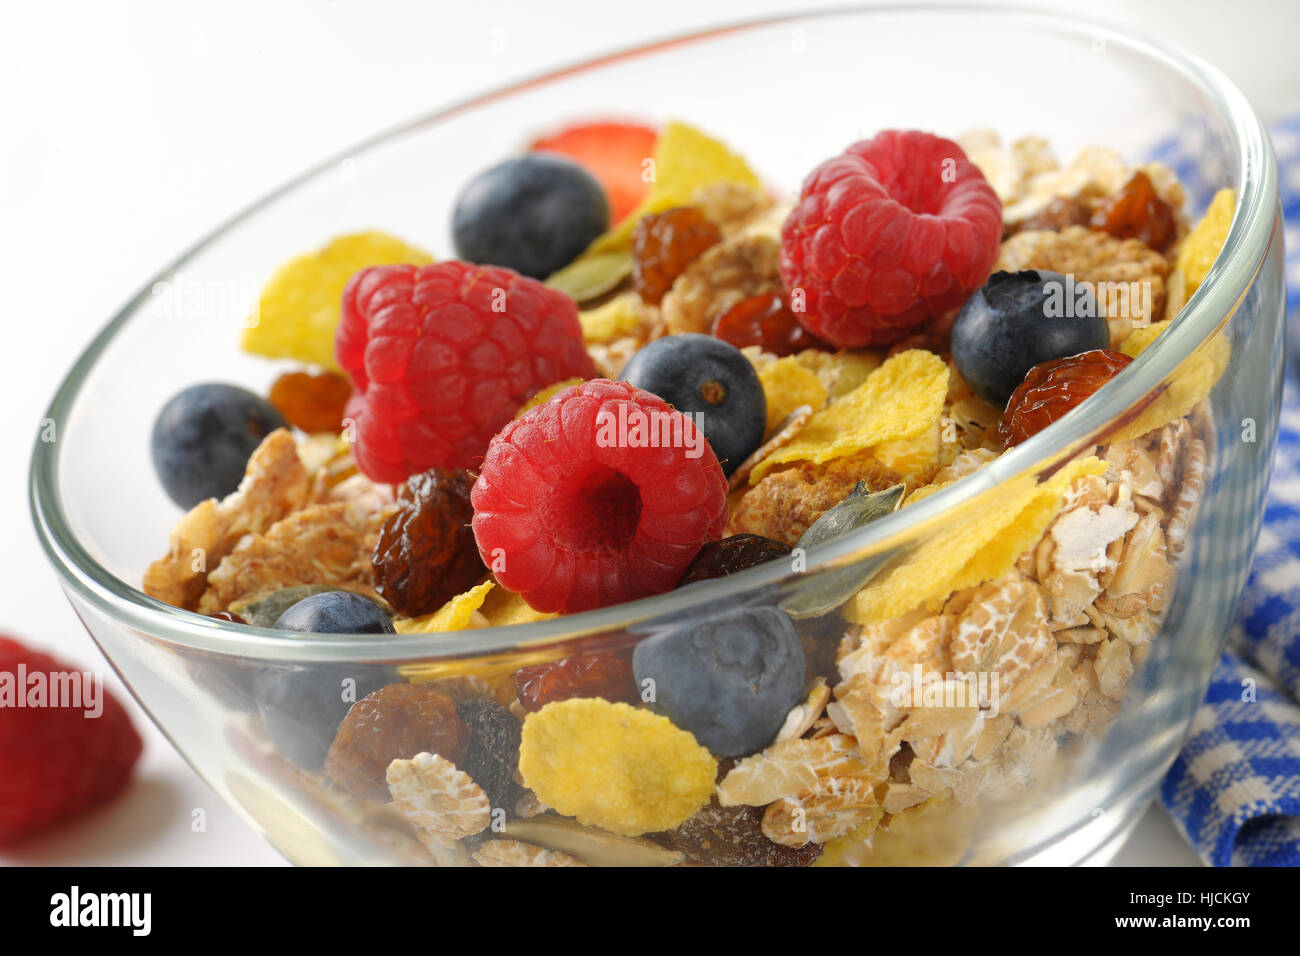 bowl of cereals and berry fruit - detail Stock Photo